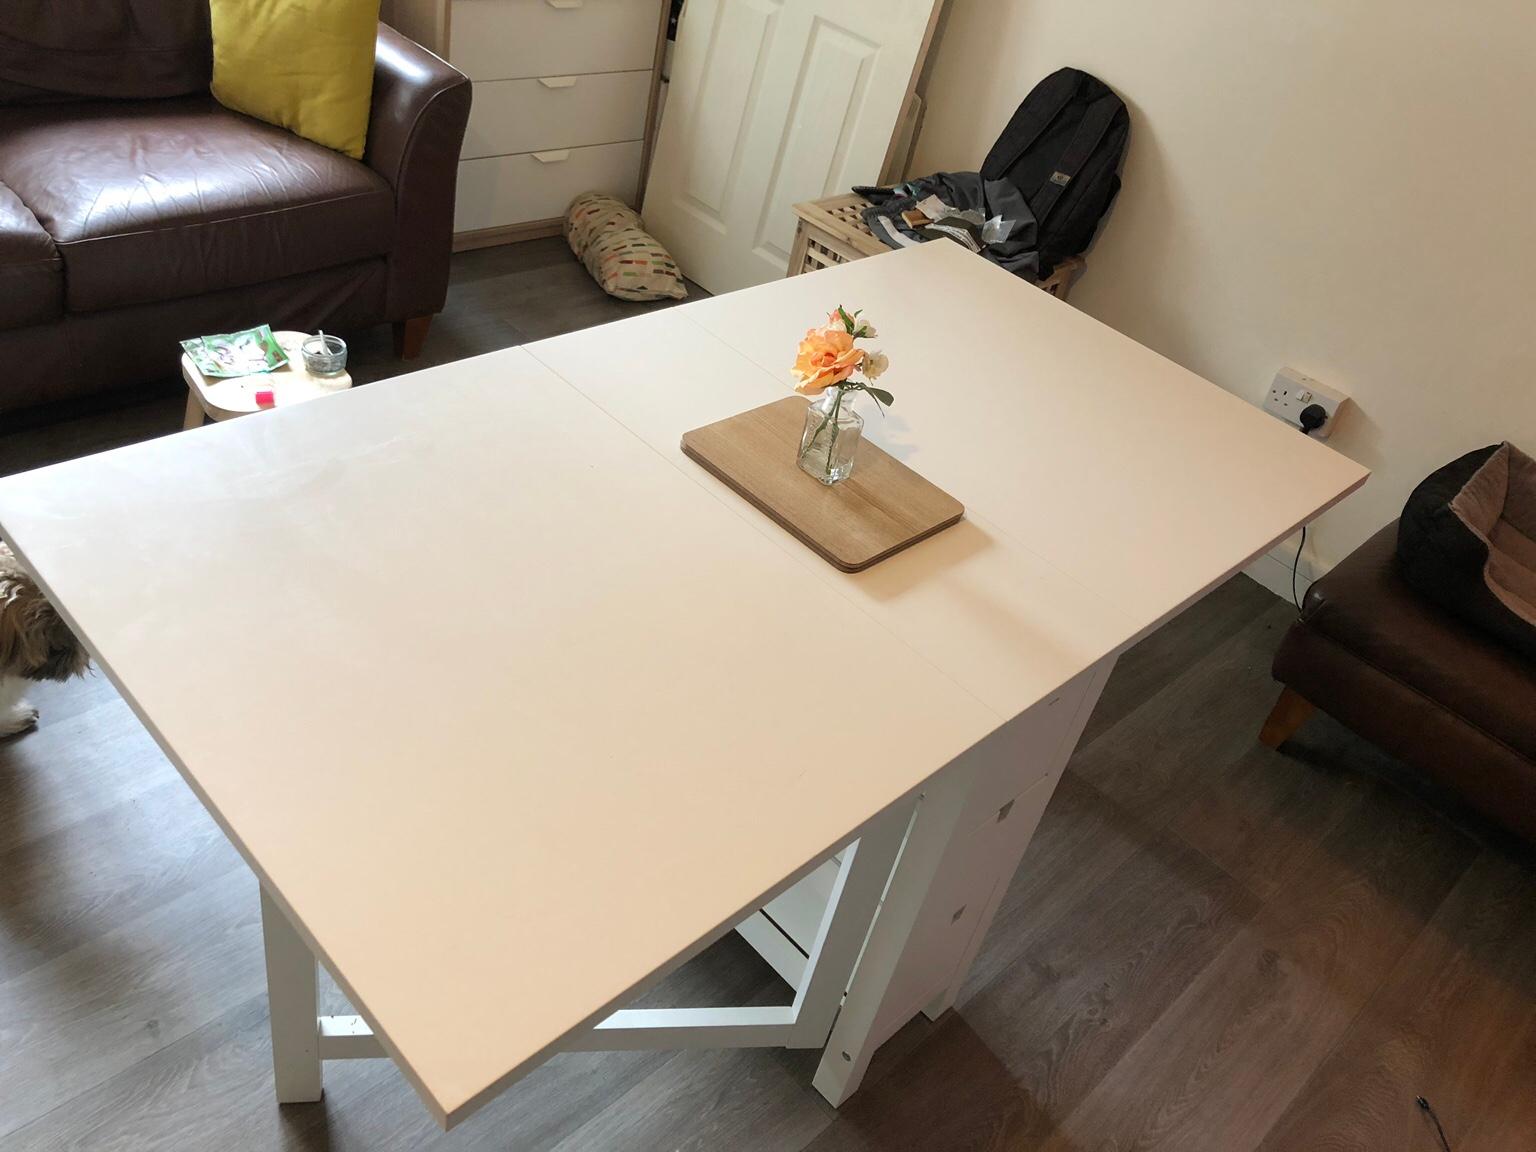 Ikea Space Saver Fold Up Table In Bs8 Bristol Fur 50 00